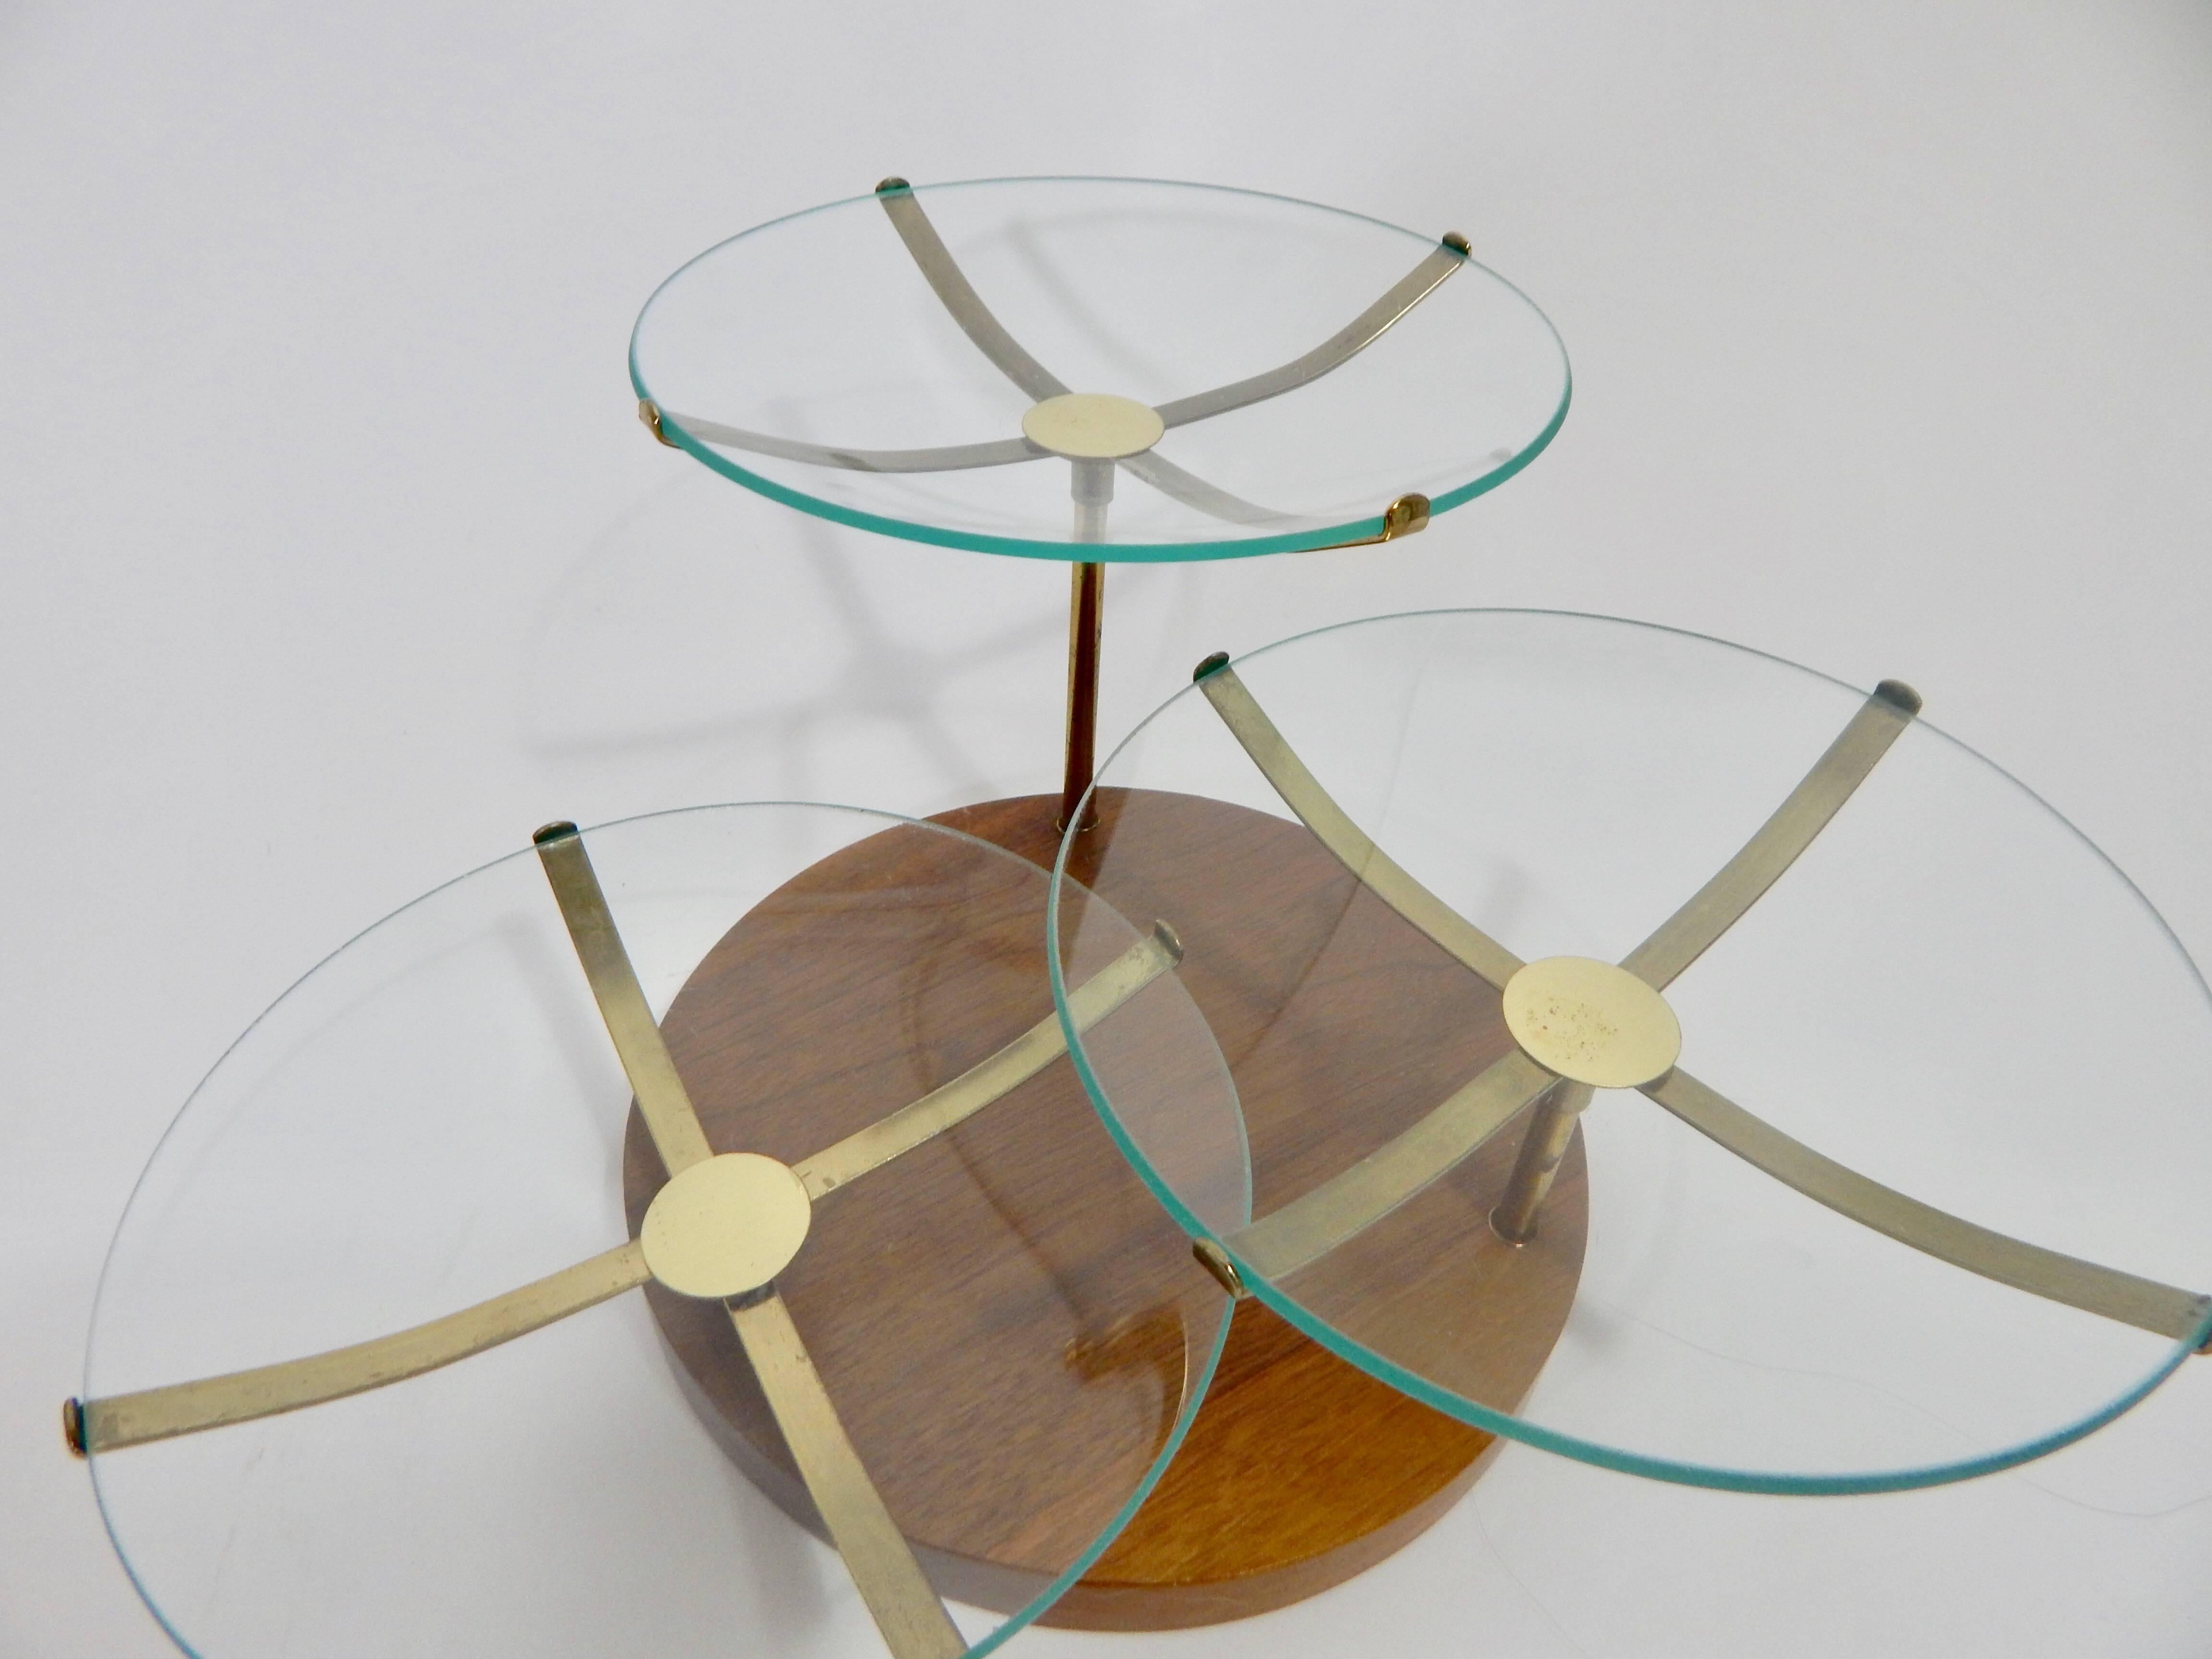 1960s three-tiered serving dish. Walnut wood base. Brass holding stands and glass plates.